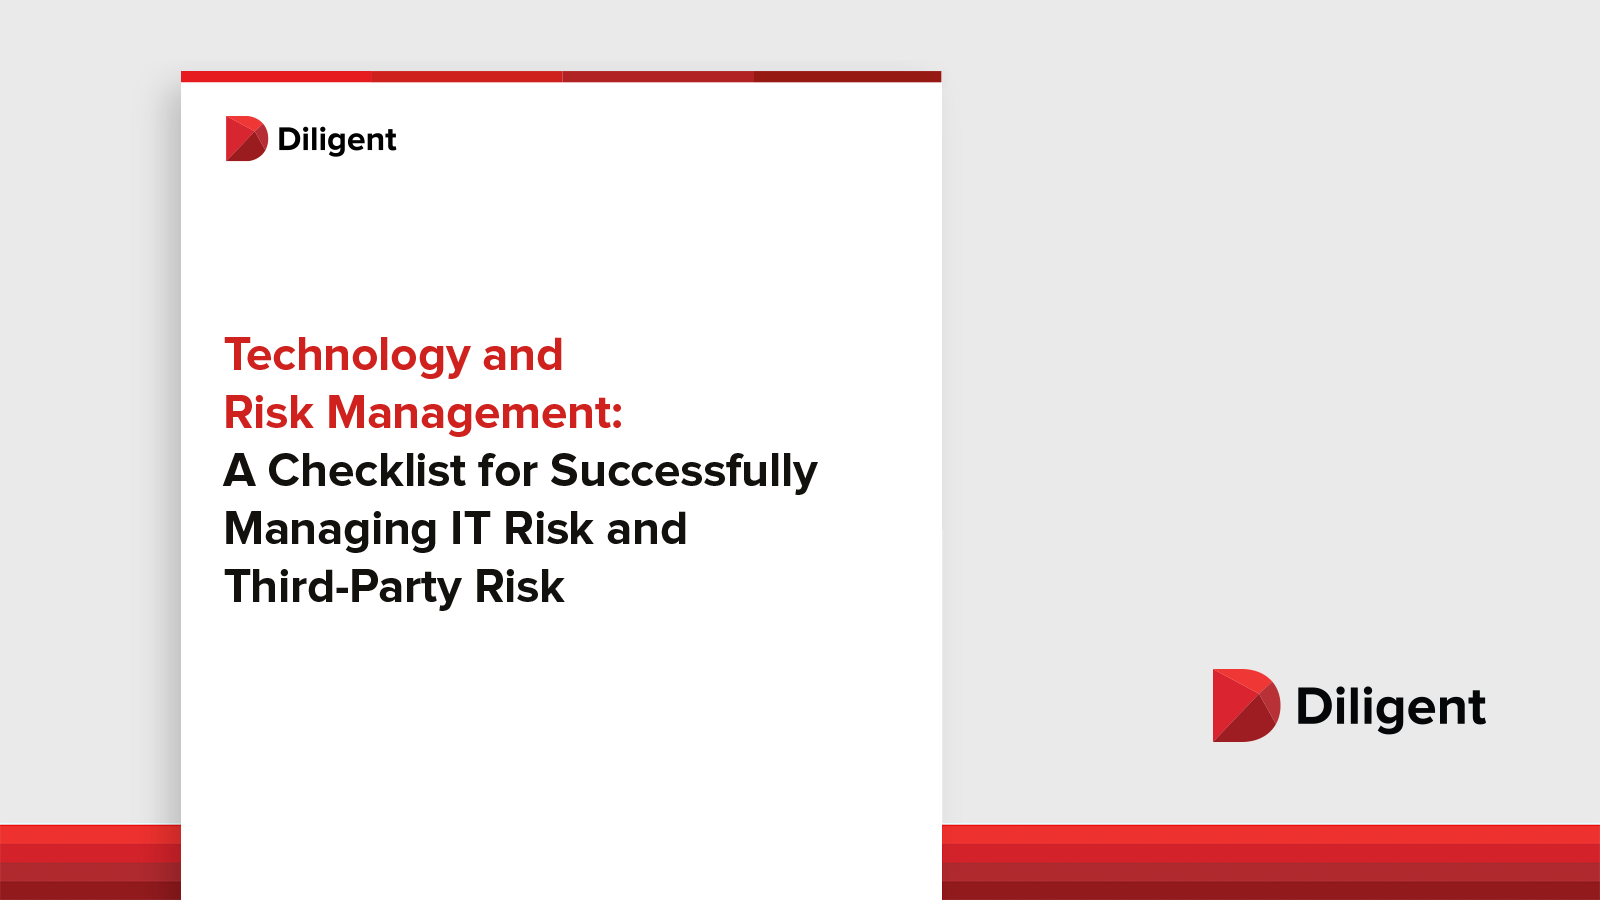 Technology and Risk Management Checklist